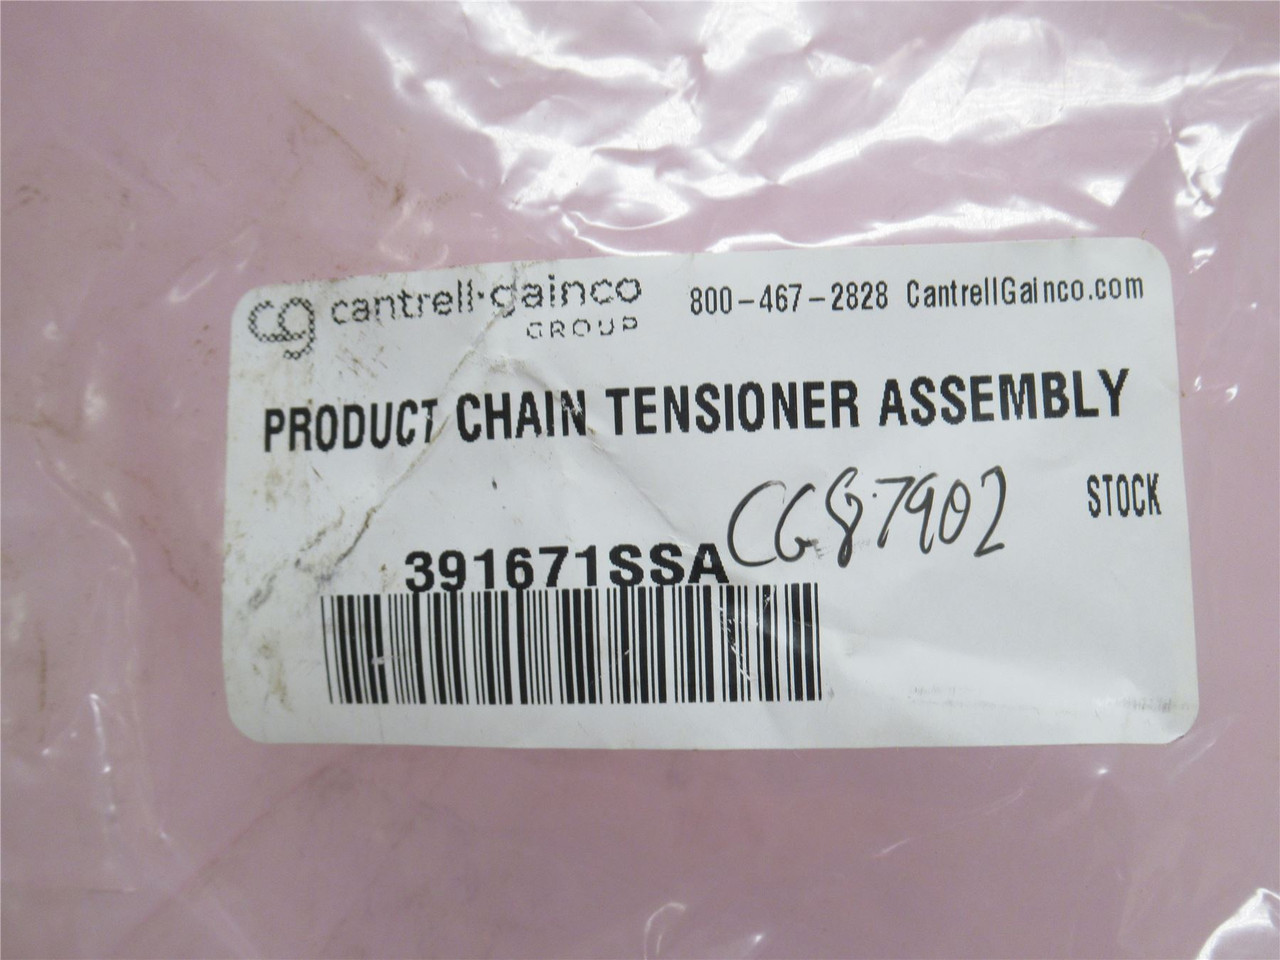 Rosta 391671SSA; Product Chain Tensioner Assembly